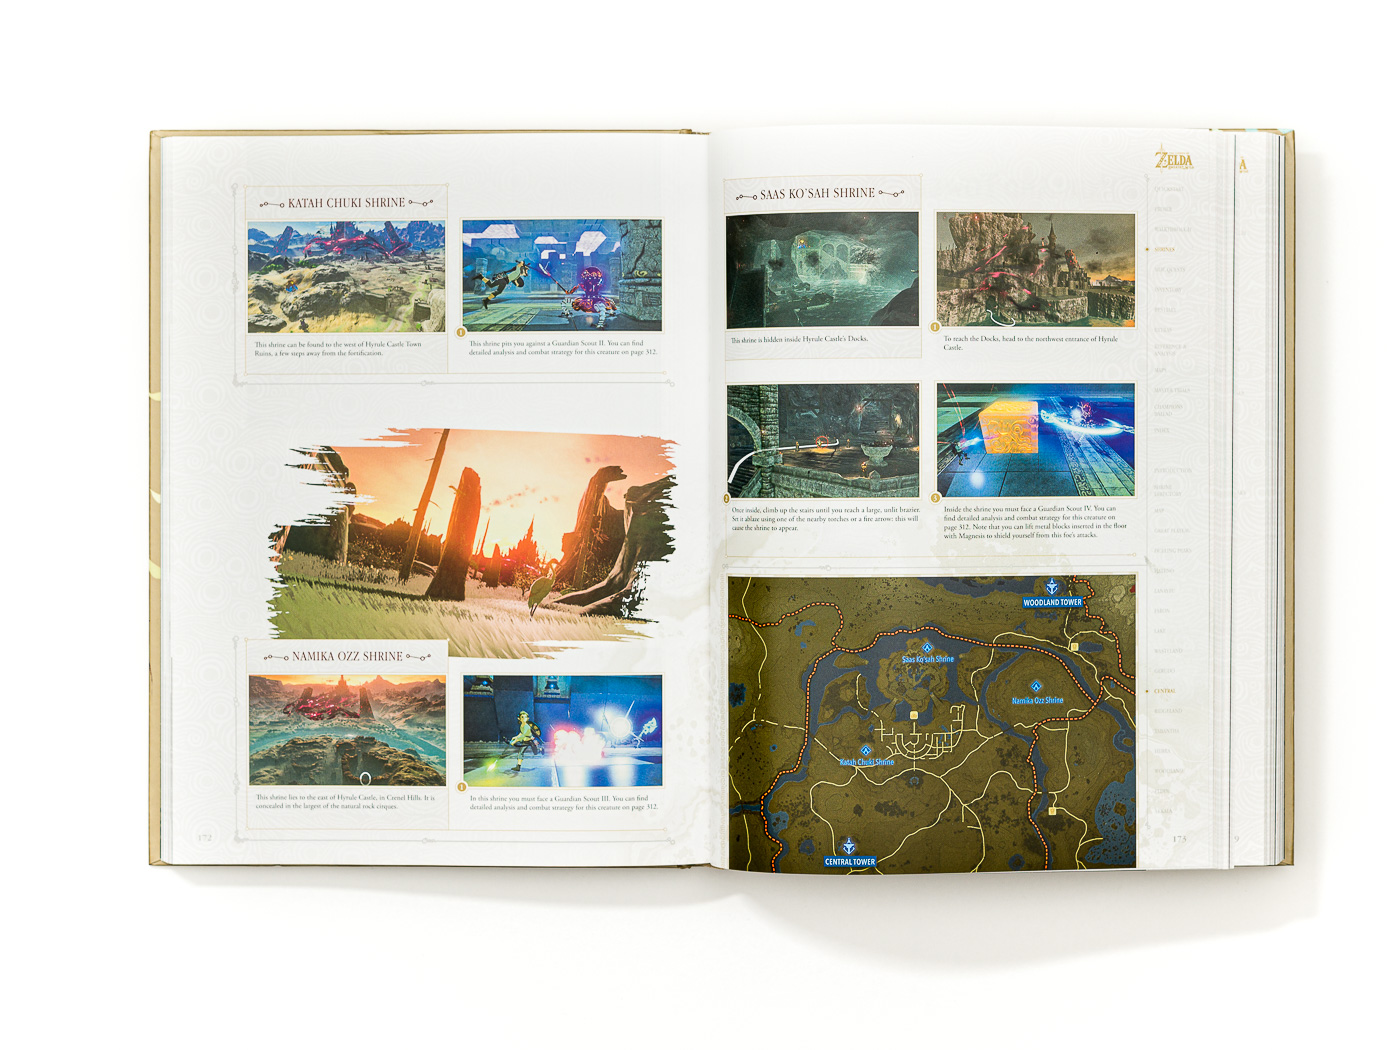 The Legend of Zelda: Breath of the Wild The Complete Official Guide,  Collector's Edition: Price Comparison on Booko